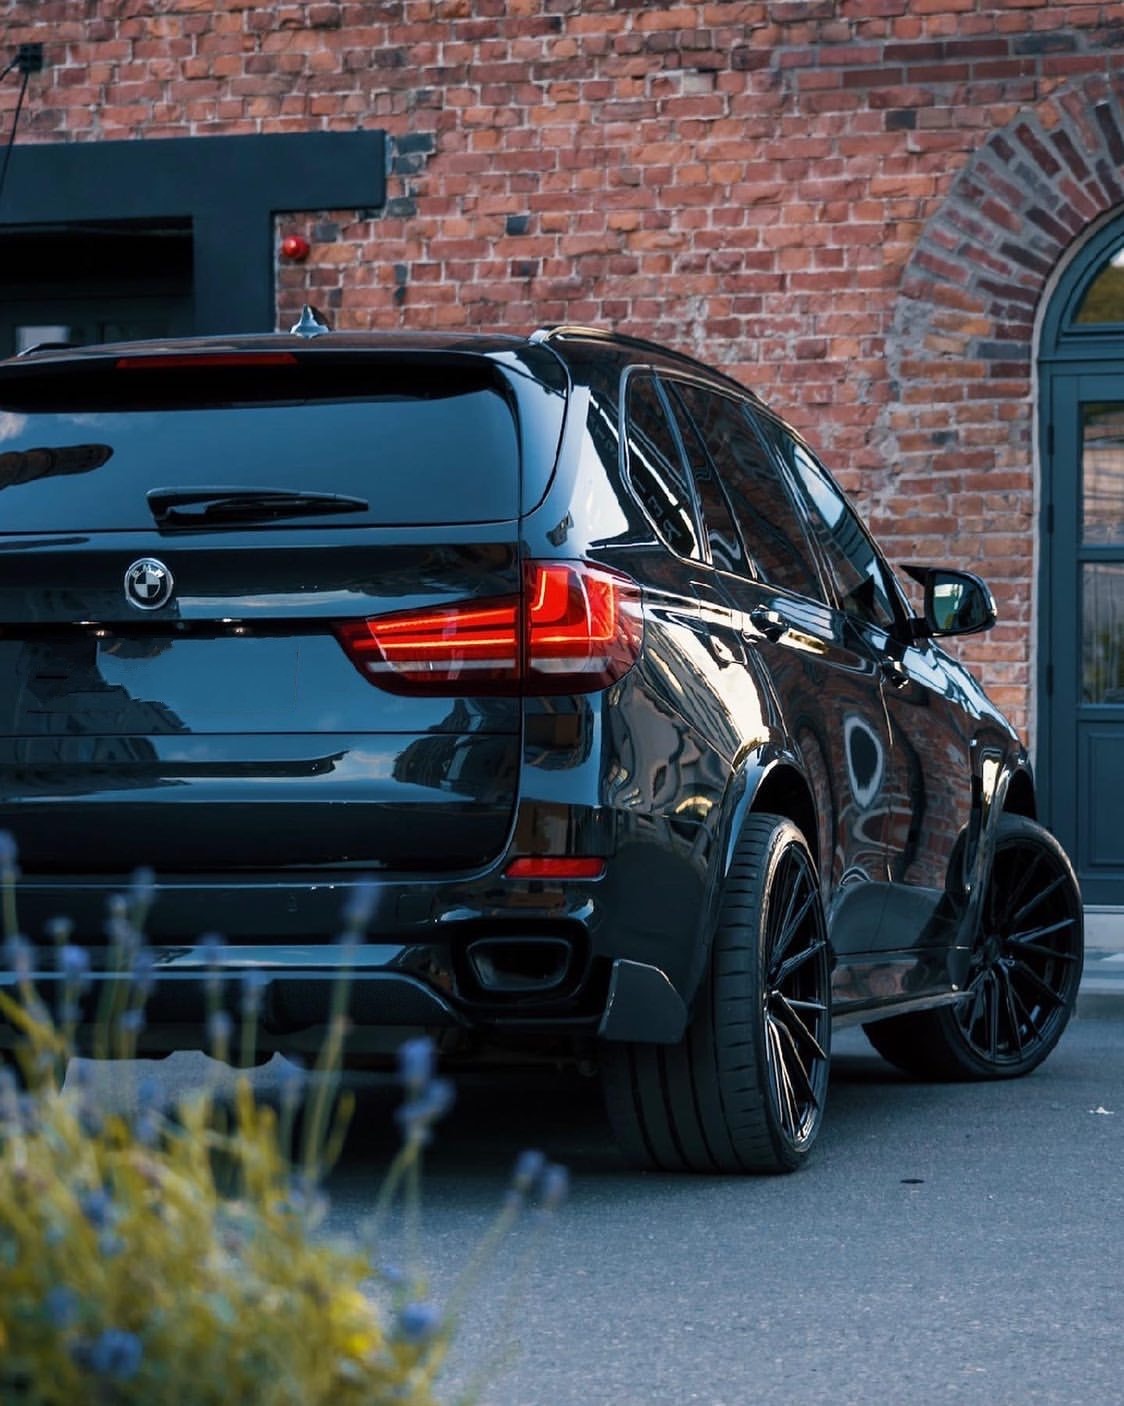 BMW X5 F15 M Performance Carbon Fibre Rear Bumper Diffuser with Carbon Fibre Rear Bumper Corner Canards - Inspired by the M Performance design Styling to perfectly match the X5's shape and dynamics. This product increases air diffusion and increases the presence of your X5 on the road.